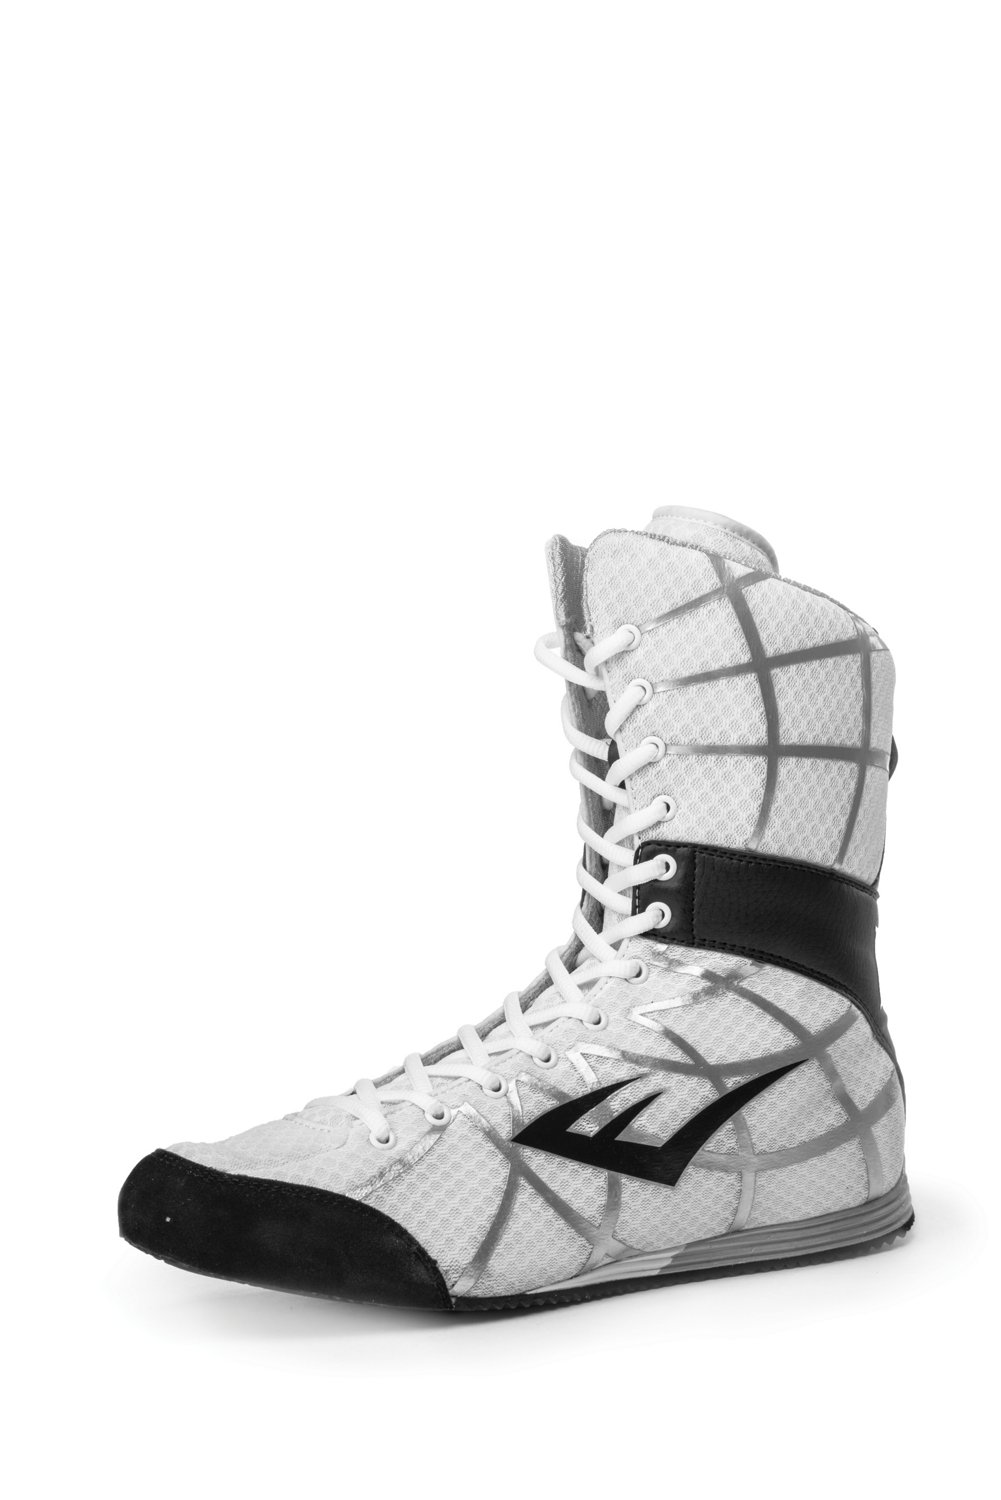 Everlast Men's Grid High-Top Boxing Shoes | Academy